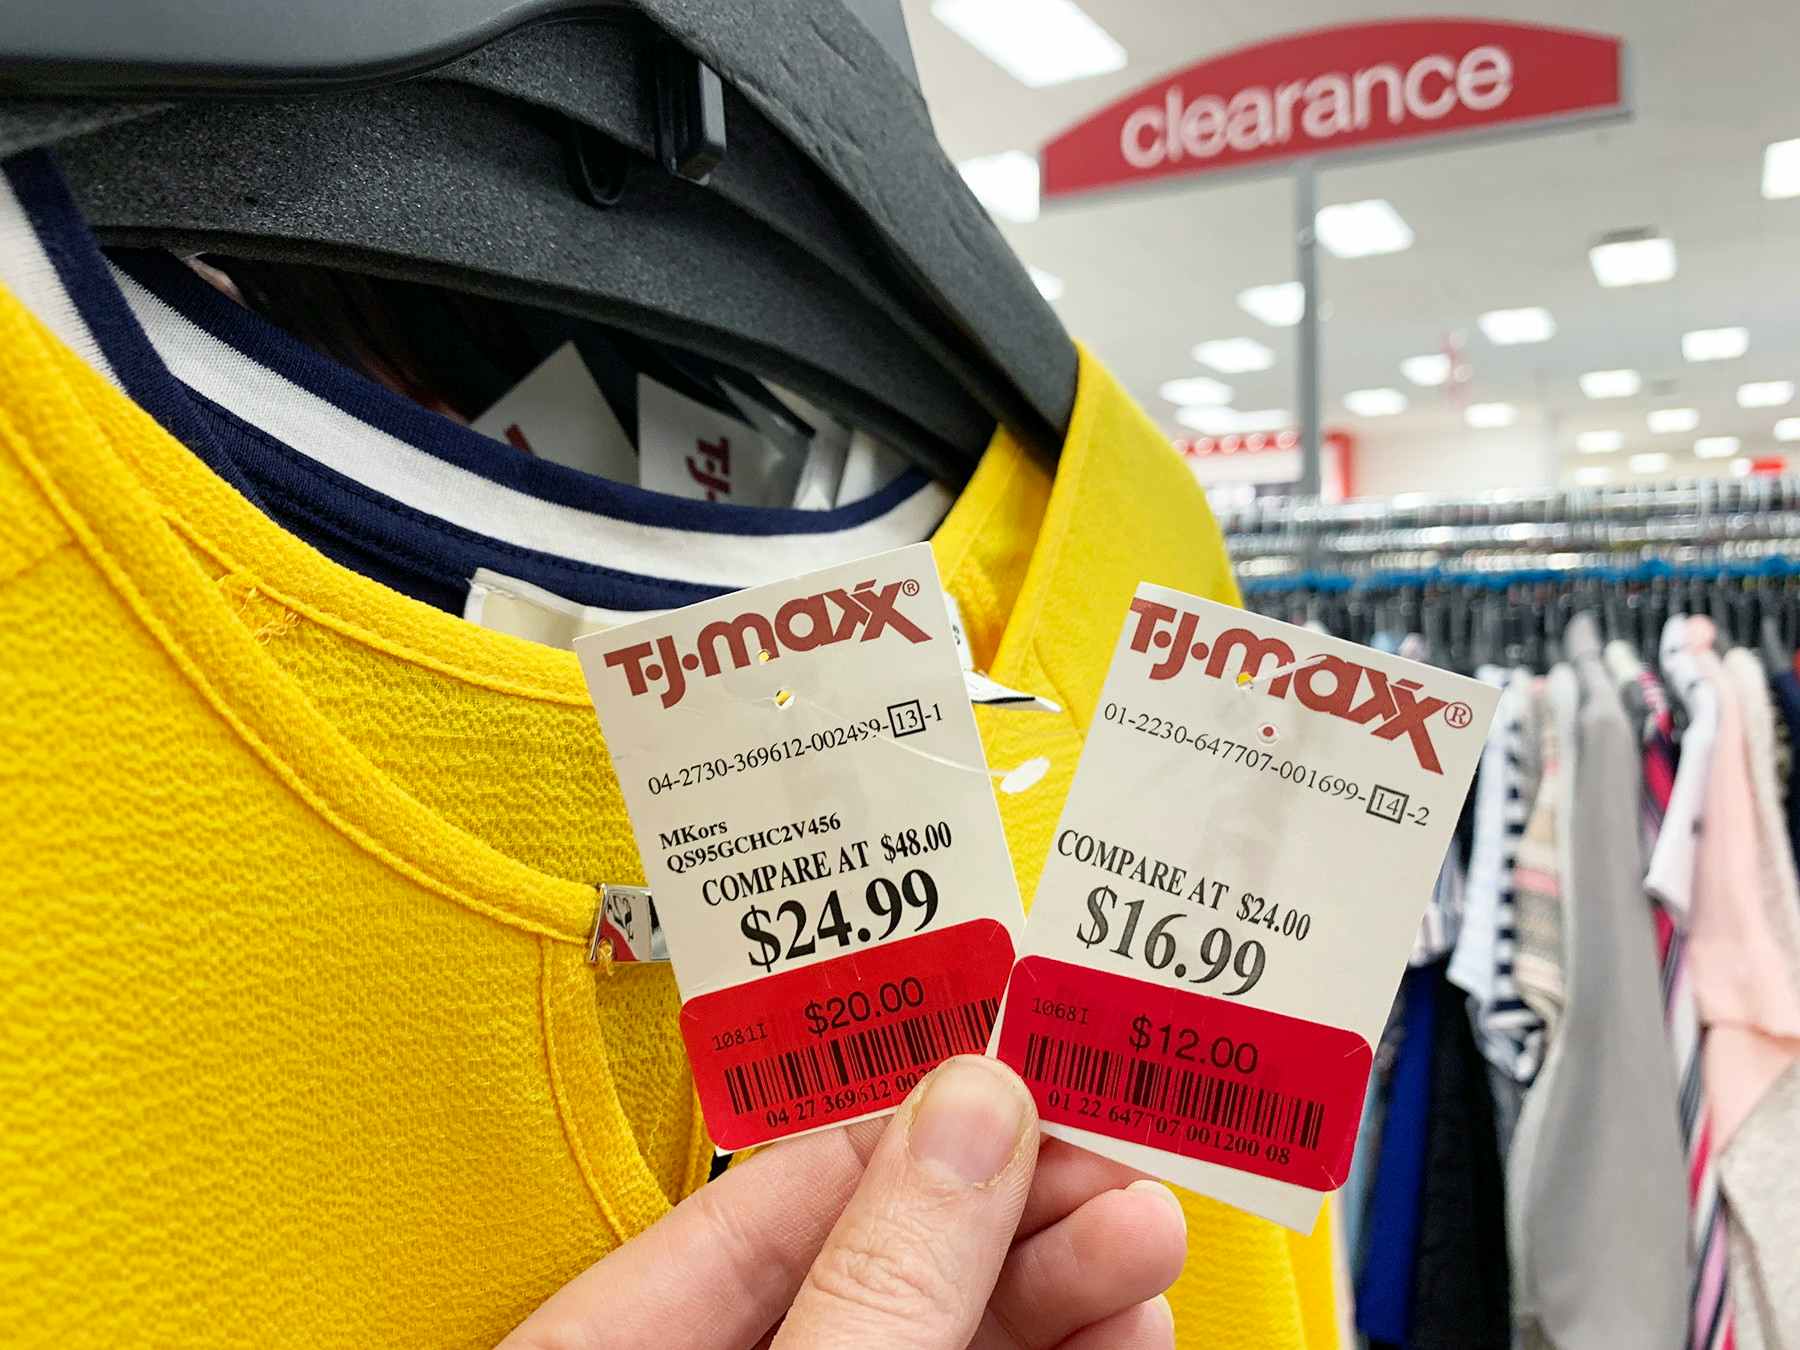 the same yellow shirt showing two different prices at T.J. Maxx